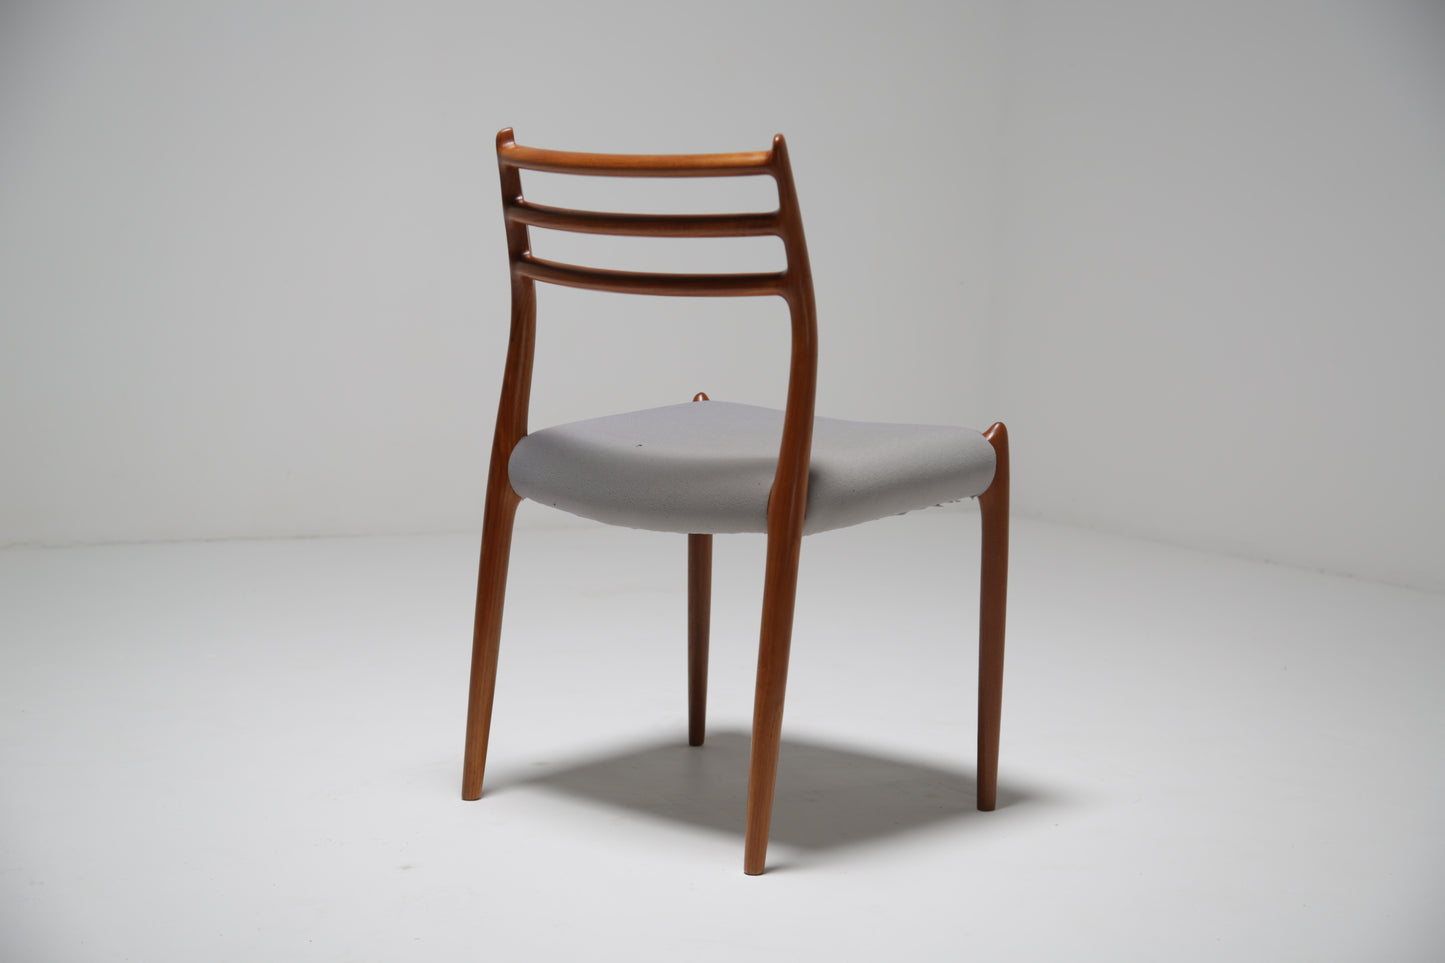 1960s Niels Moller Model 62 & 78 dining chairs